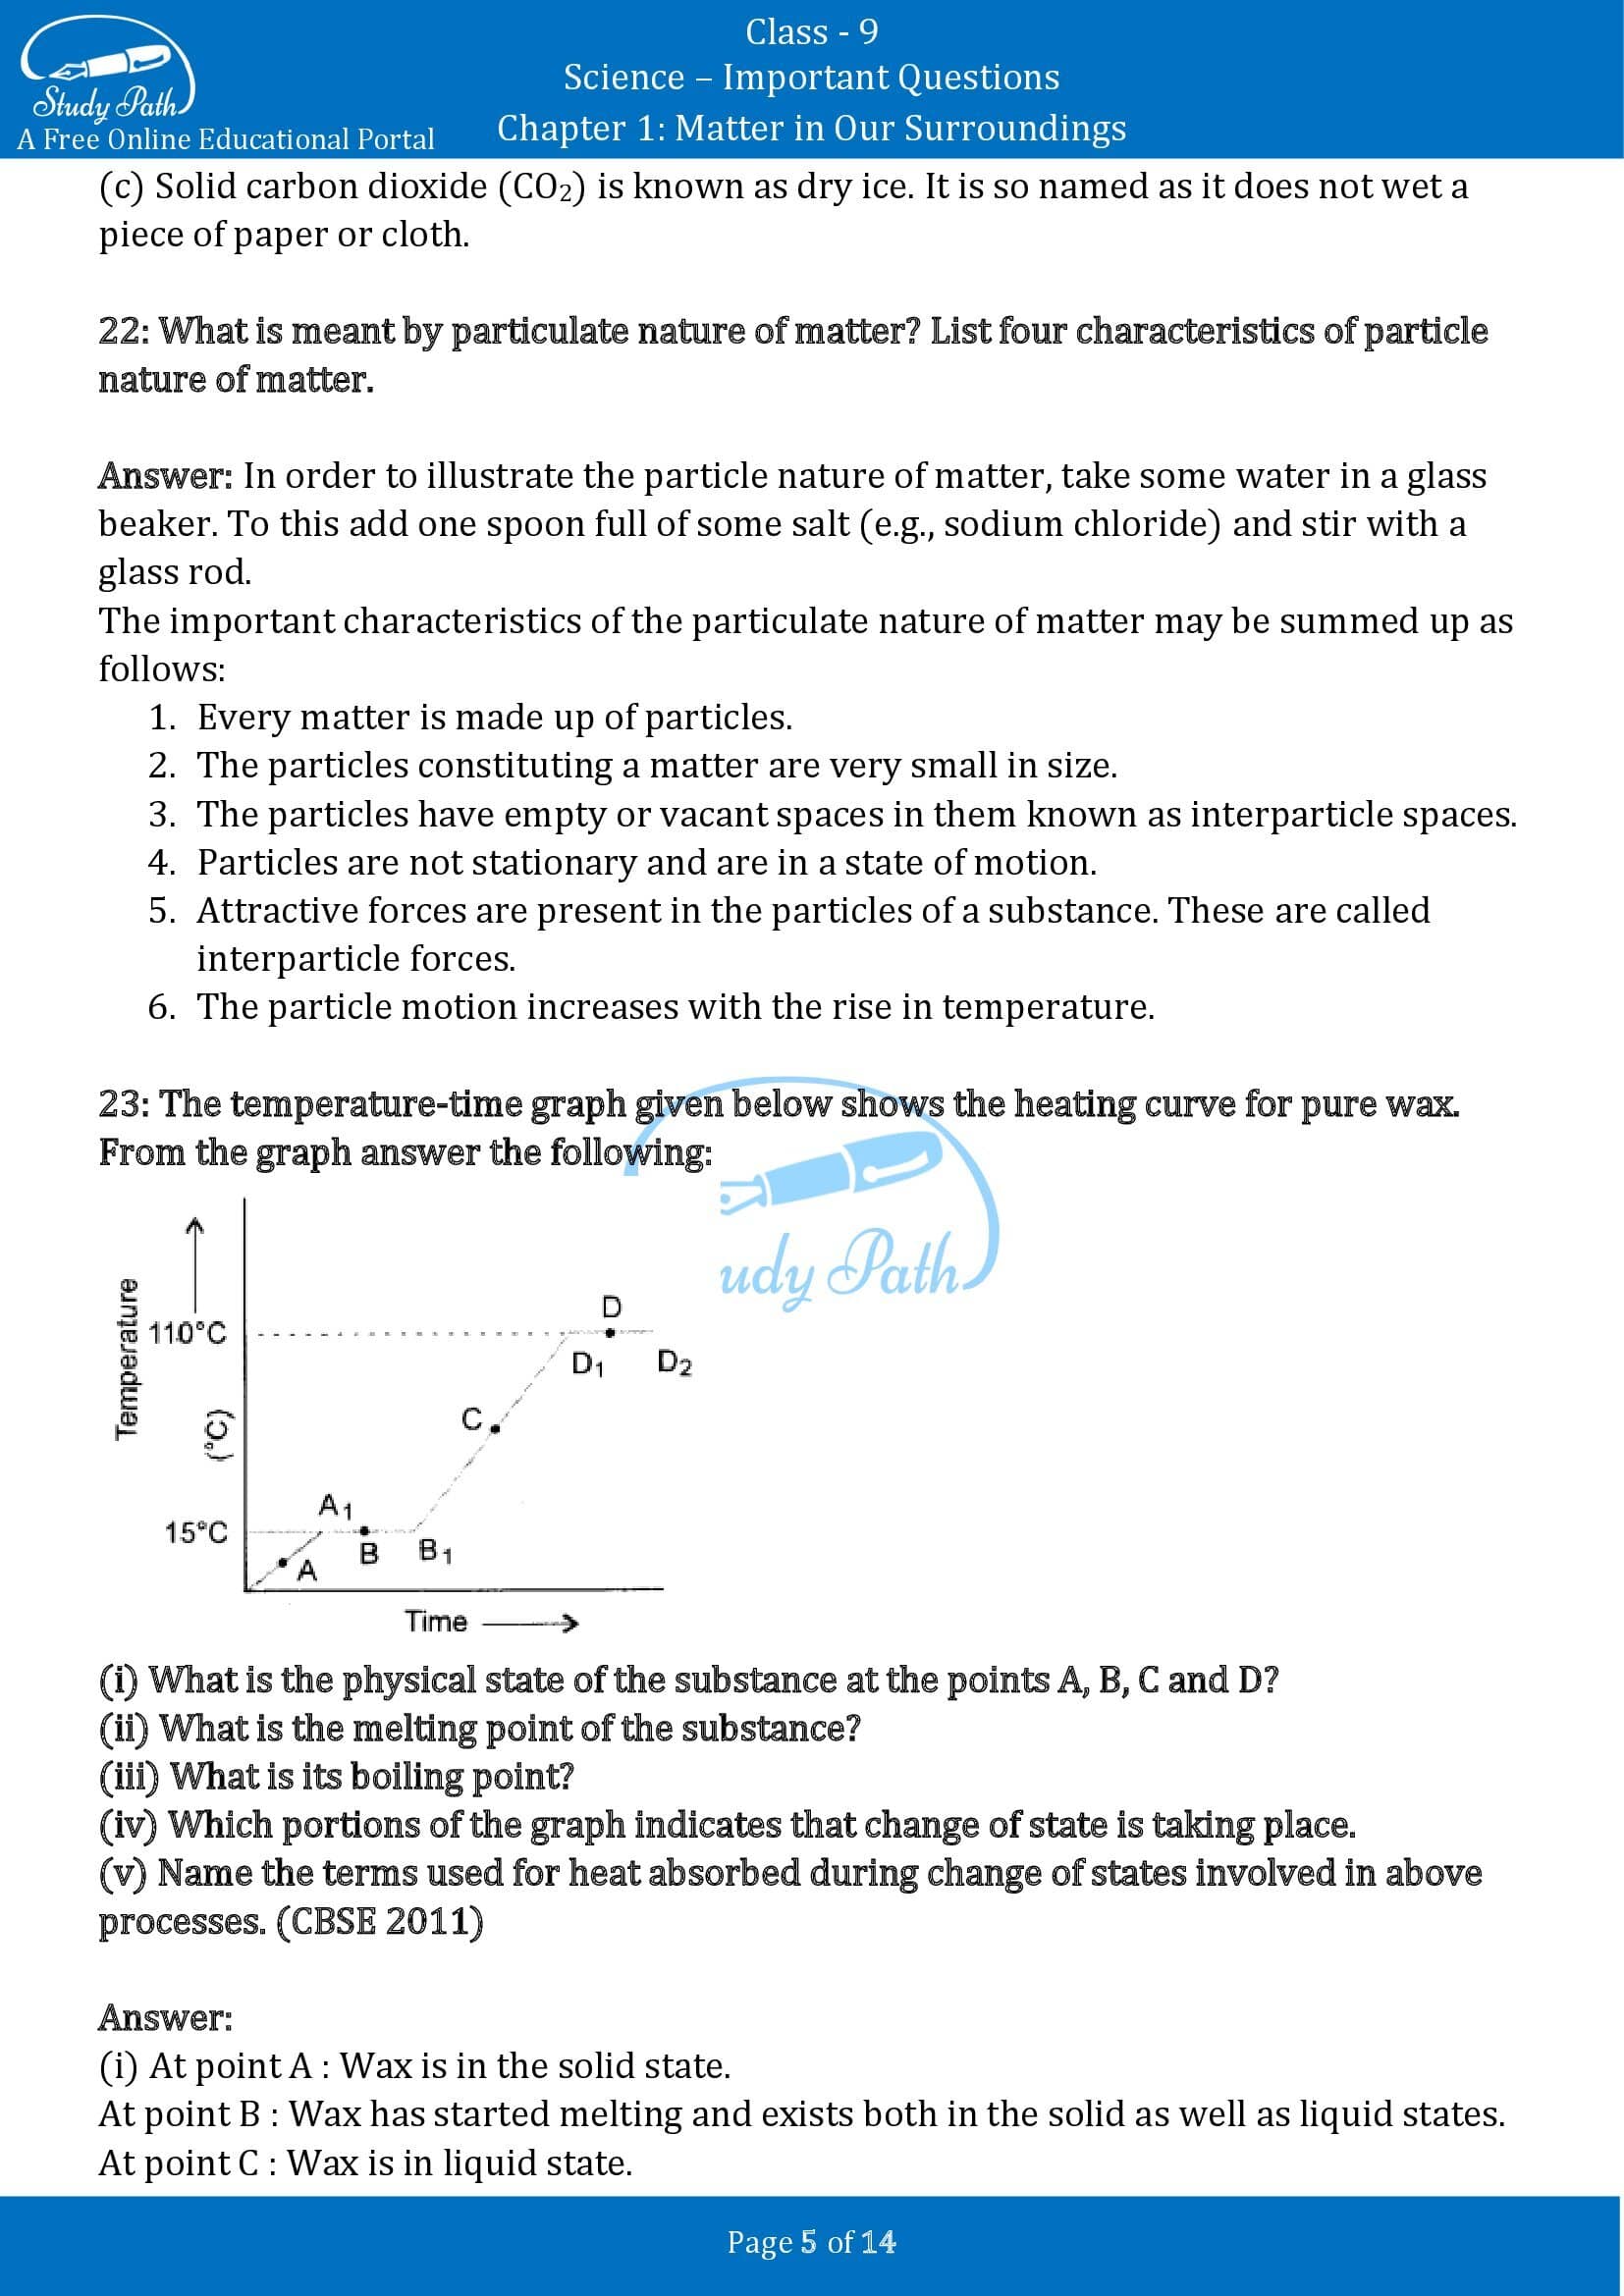 Important Questions for Class 9 Science Chapter 1 Matter in Our Surroundings 00005